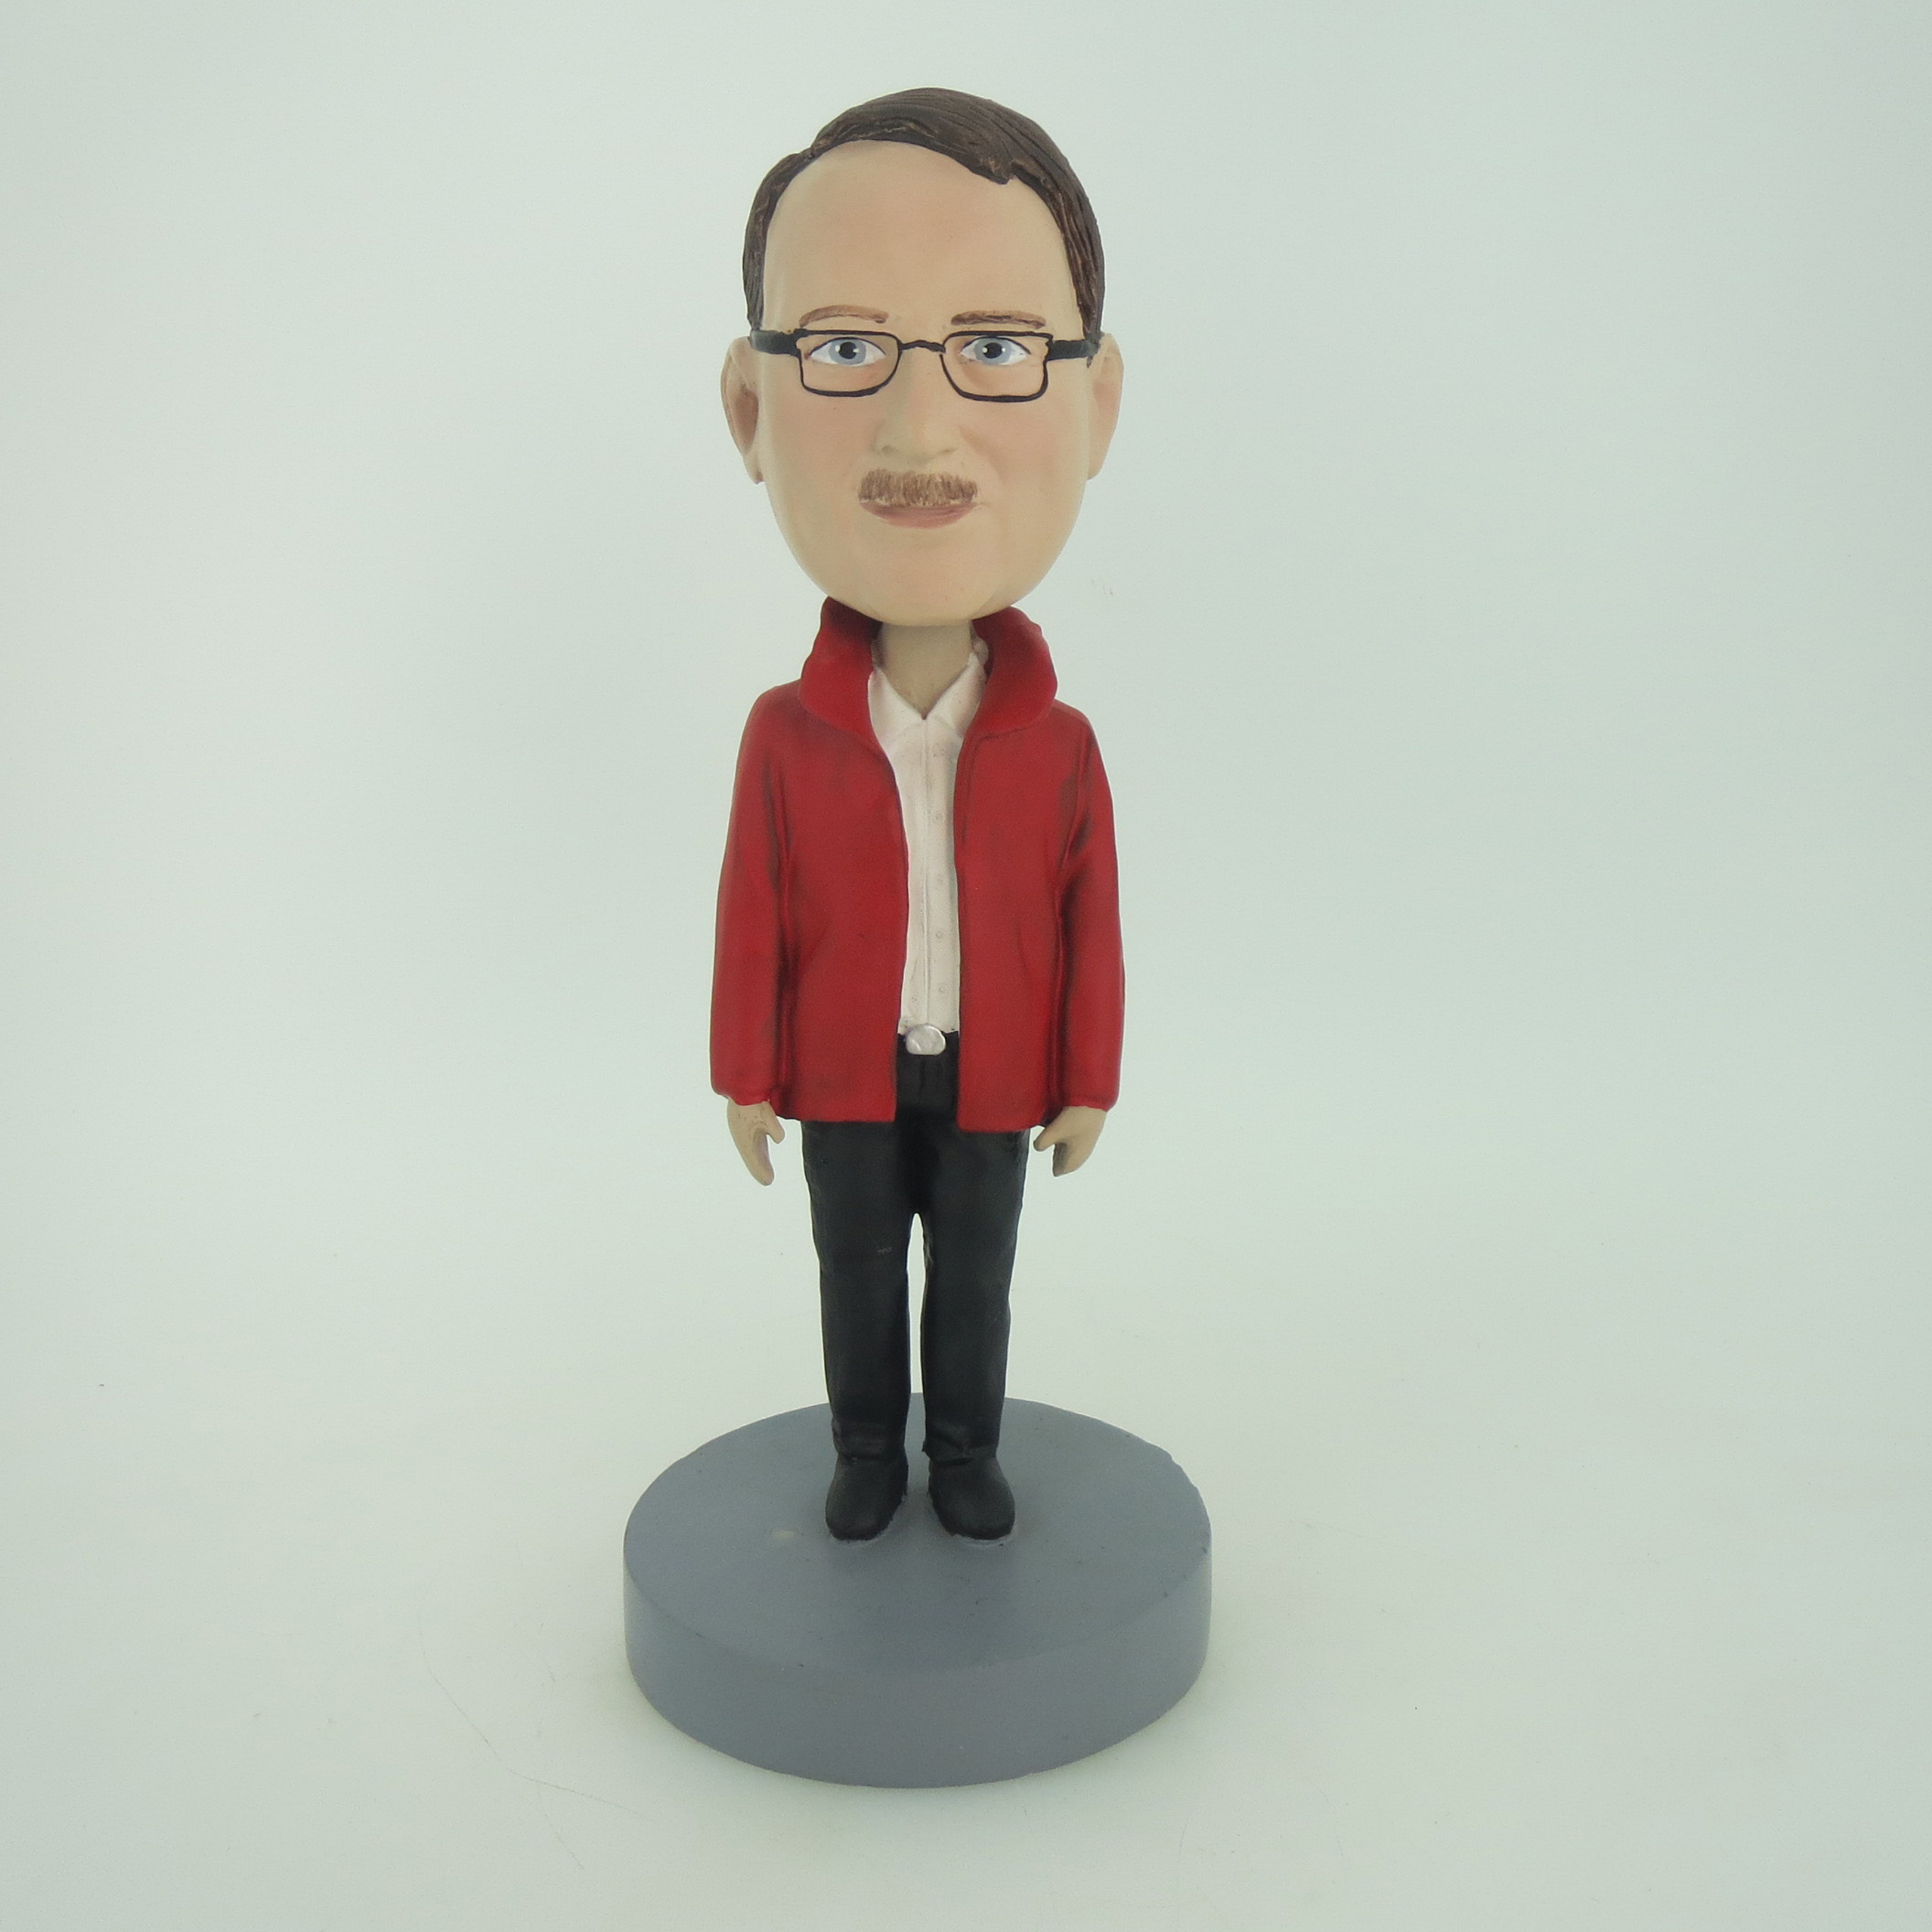 Picture of Custom Bobblehead Doll: Man In Red Jacket